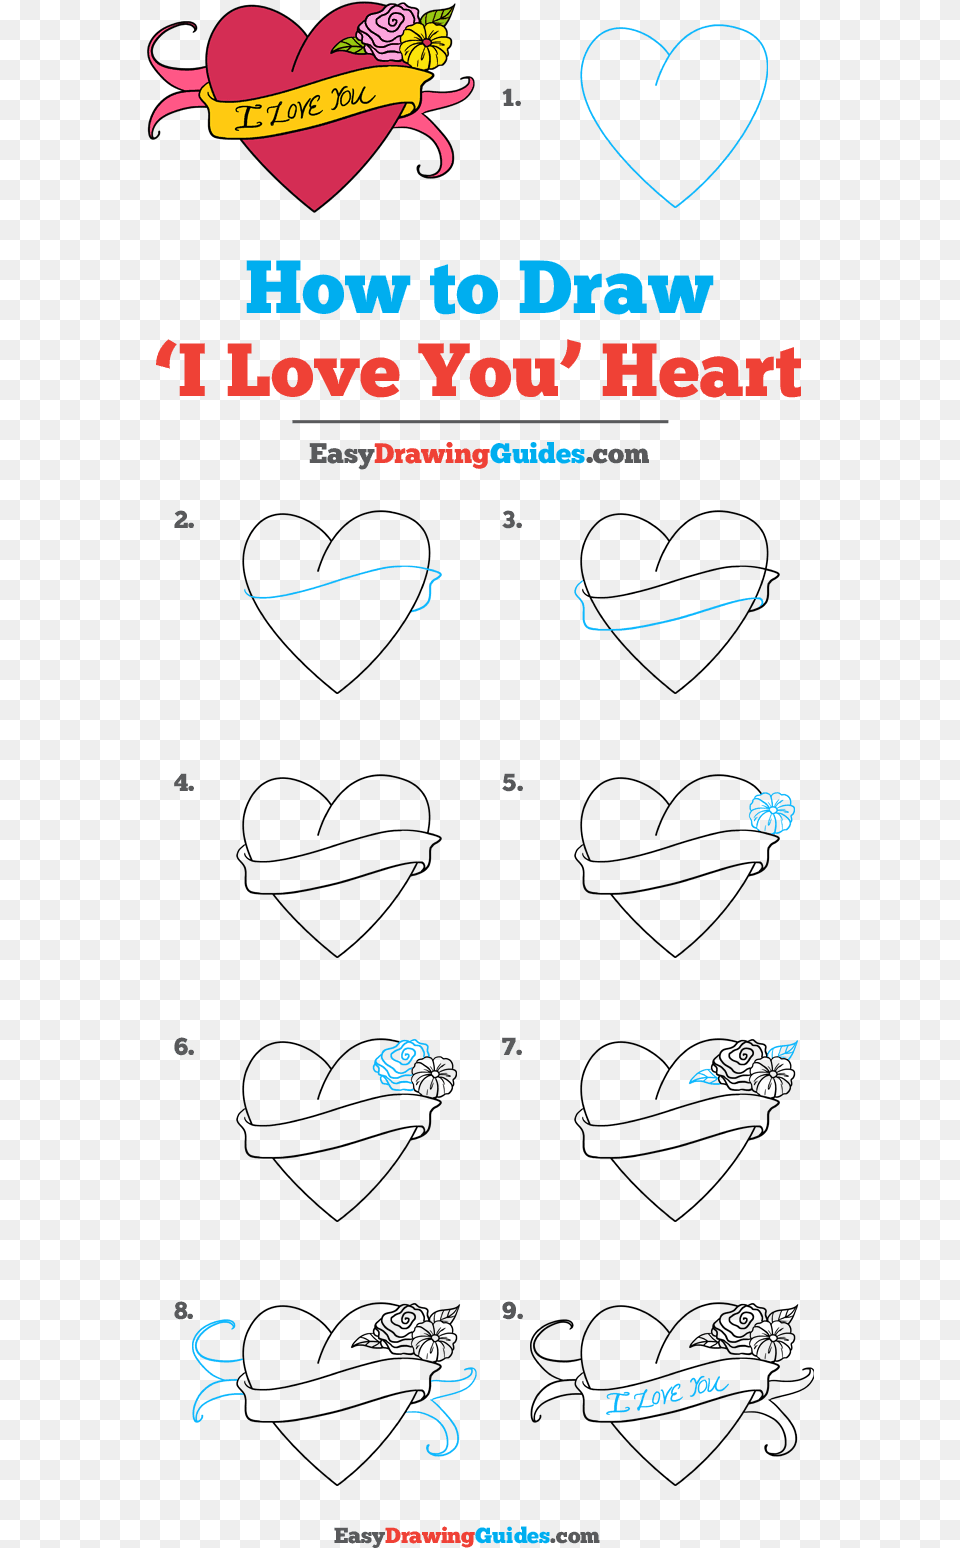 How To Draw I Love You Heart Diagram, Advertisement, Poster, Book, Publication Free Png Download